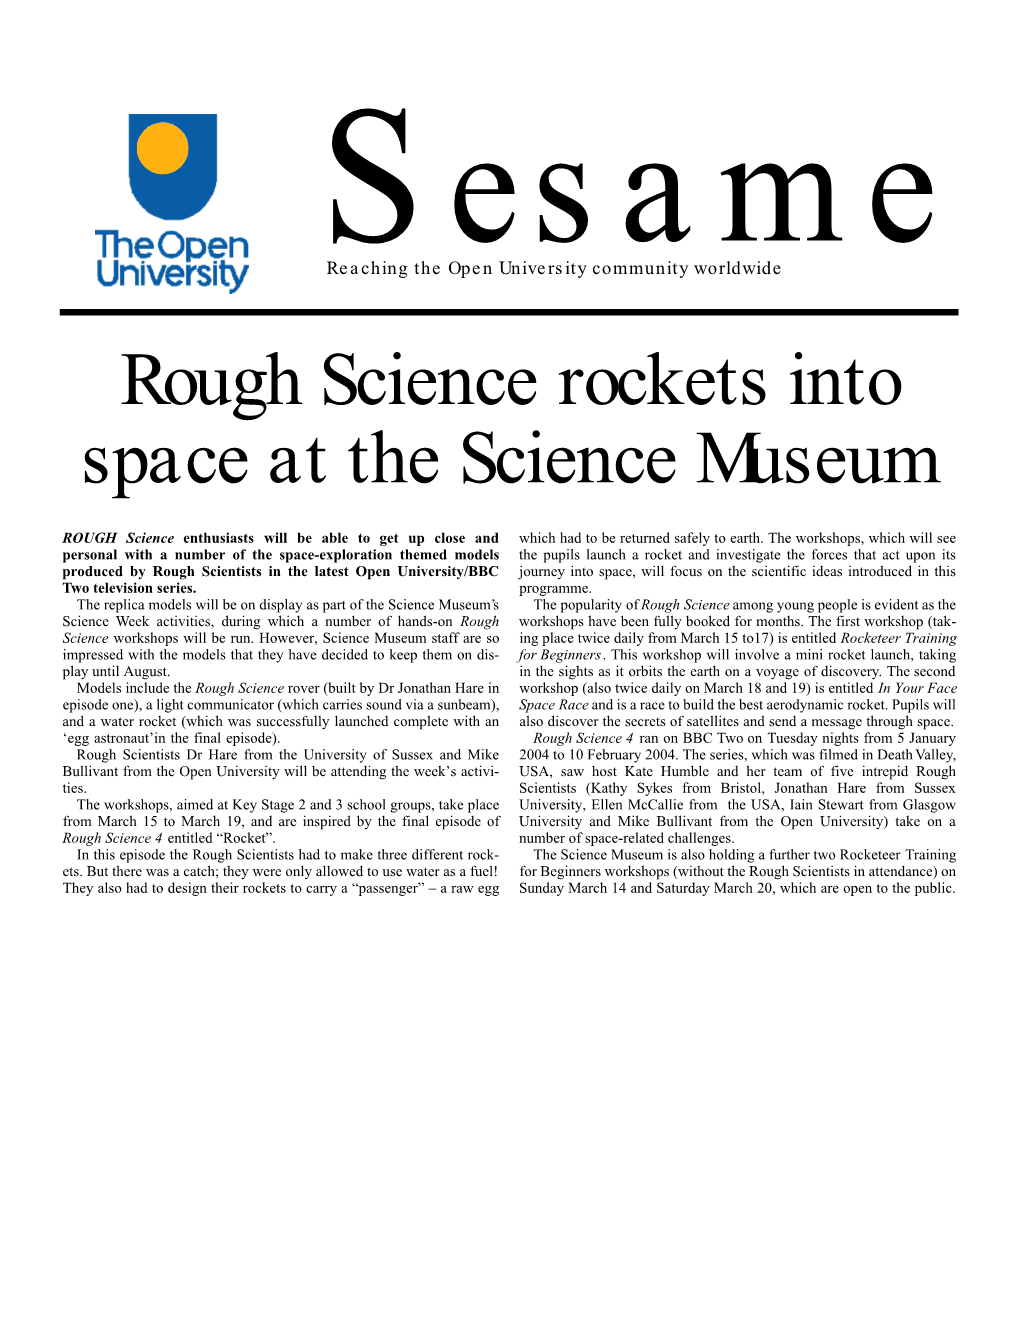 Rough Science Rockets Into Space at the Science Museum